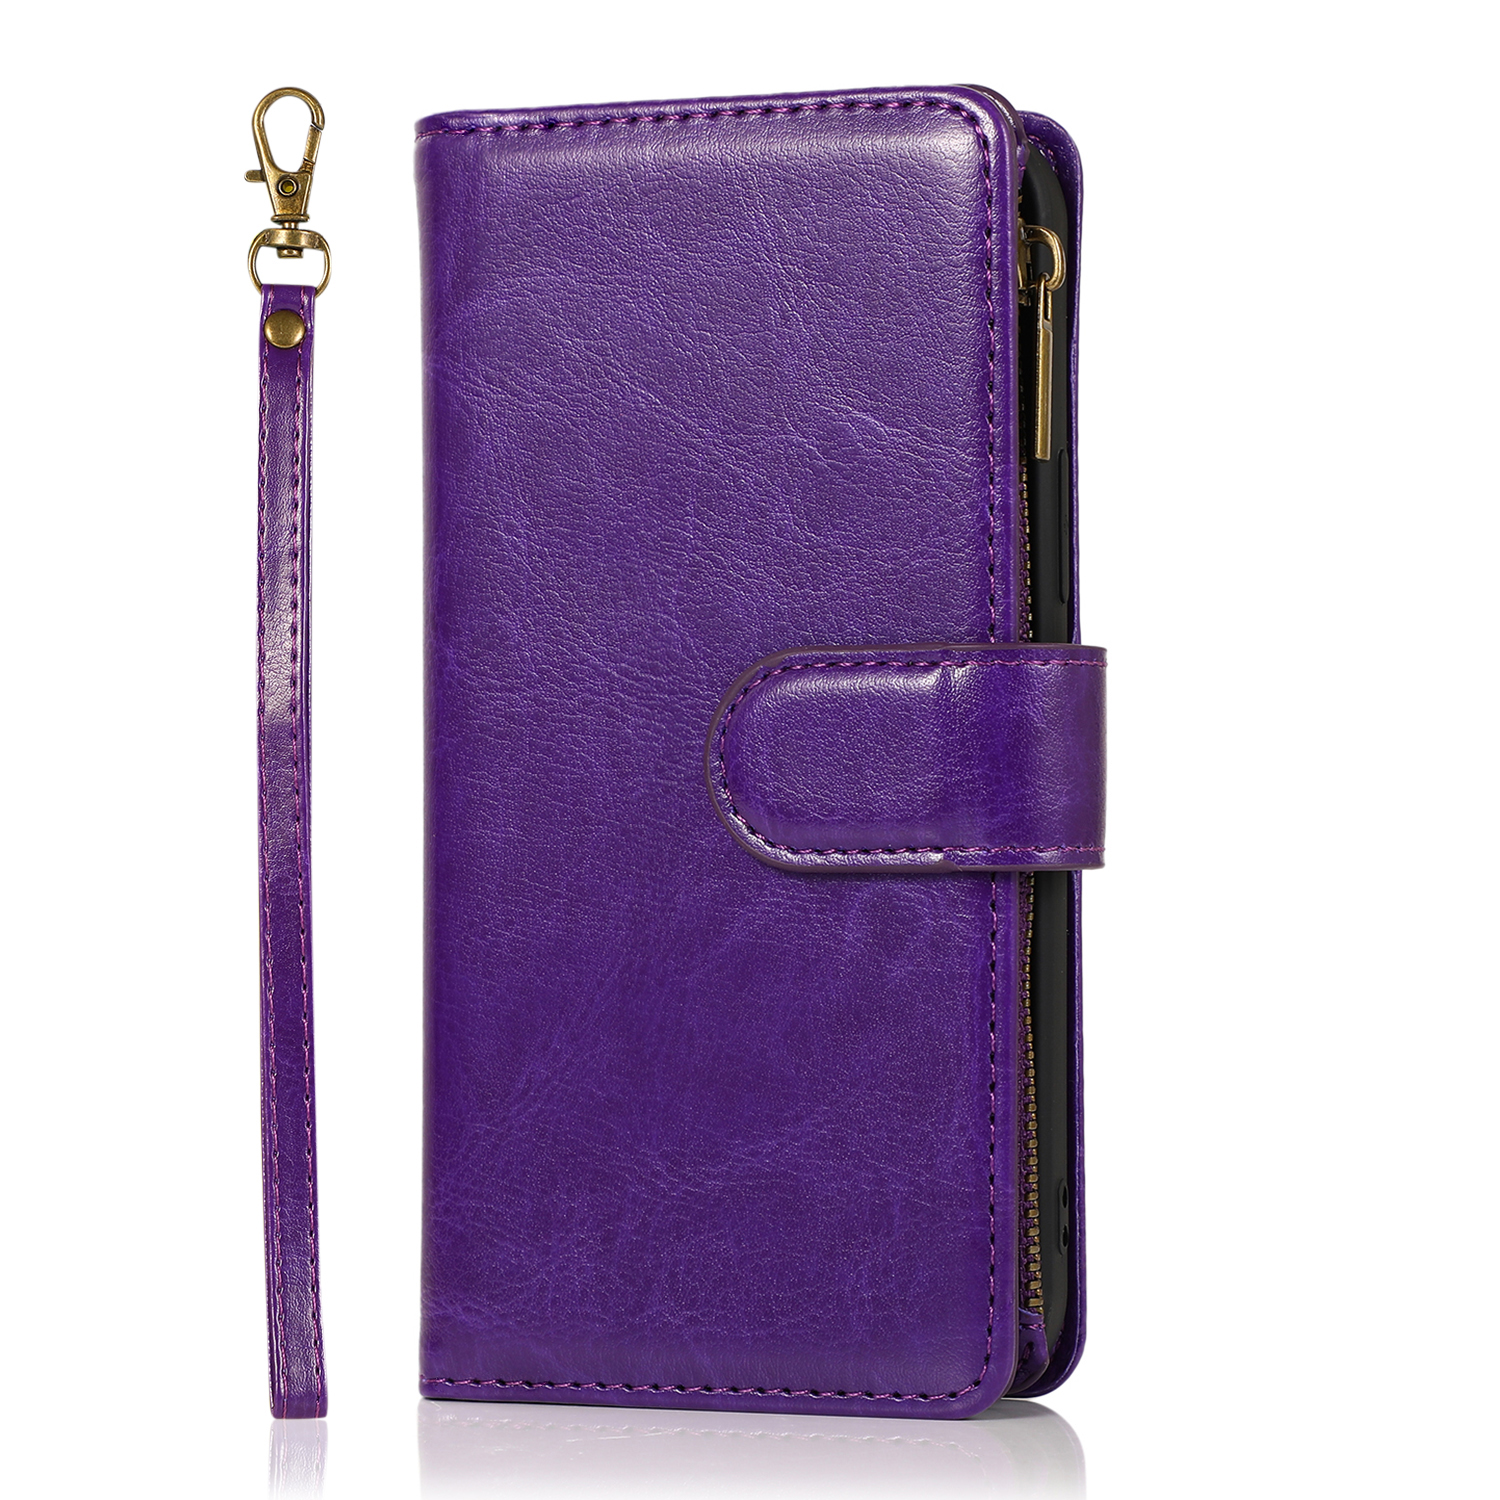 for Samsung Galaxy S21 Ultra (6.8") Leather Zipper Wallet Case 9 Credit Card Slots Cash Money Pocket Clutch Pouch Stand & Strap Cover ,Xpm Phone Case [Purple] - image 4 of 8